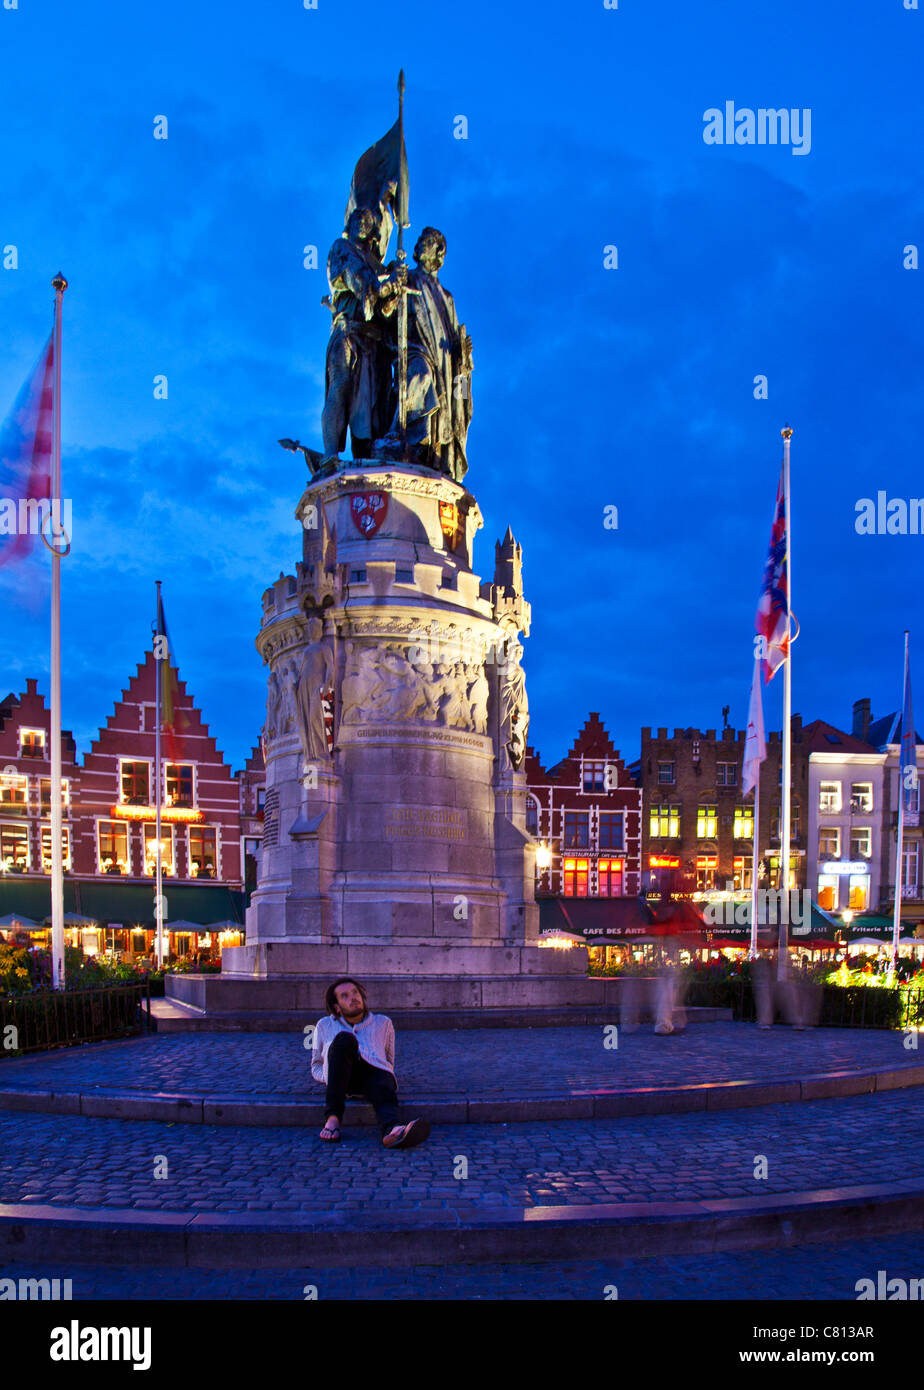 Tourist enjoying the night in front of the statue in the Grote Markt, Market Square, Bruges, Belgium at dusk, twilight. Stock Photo